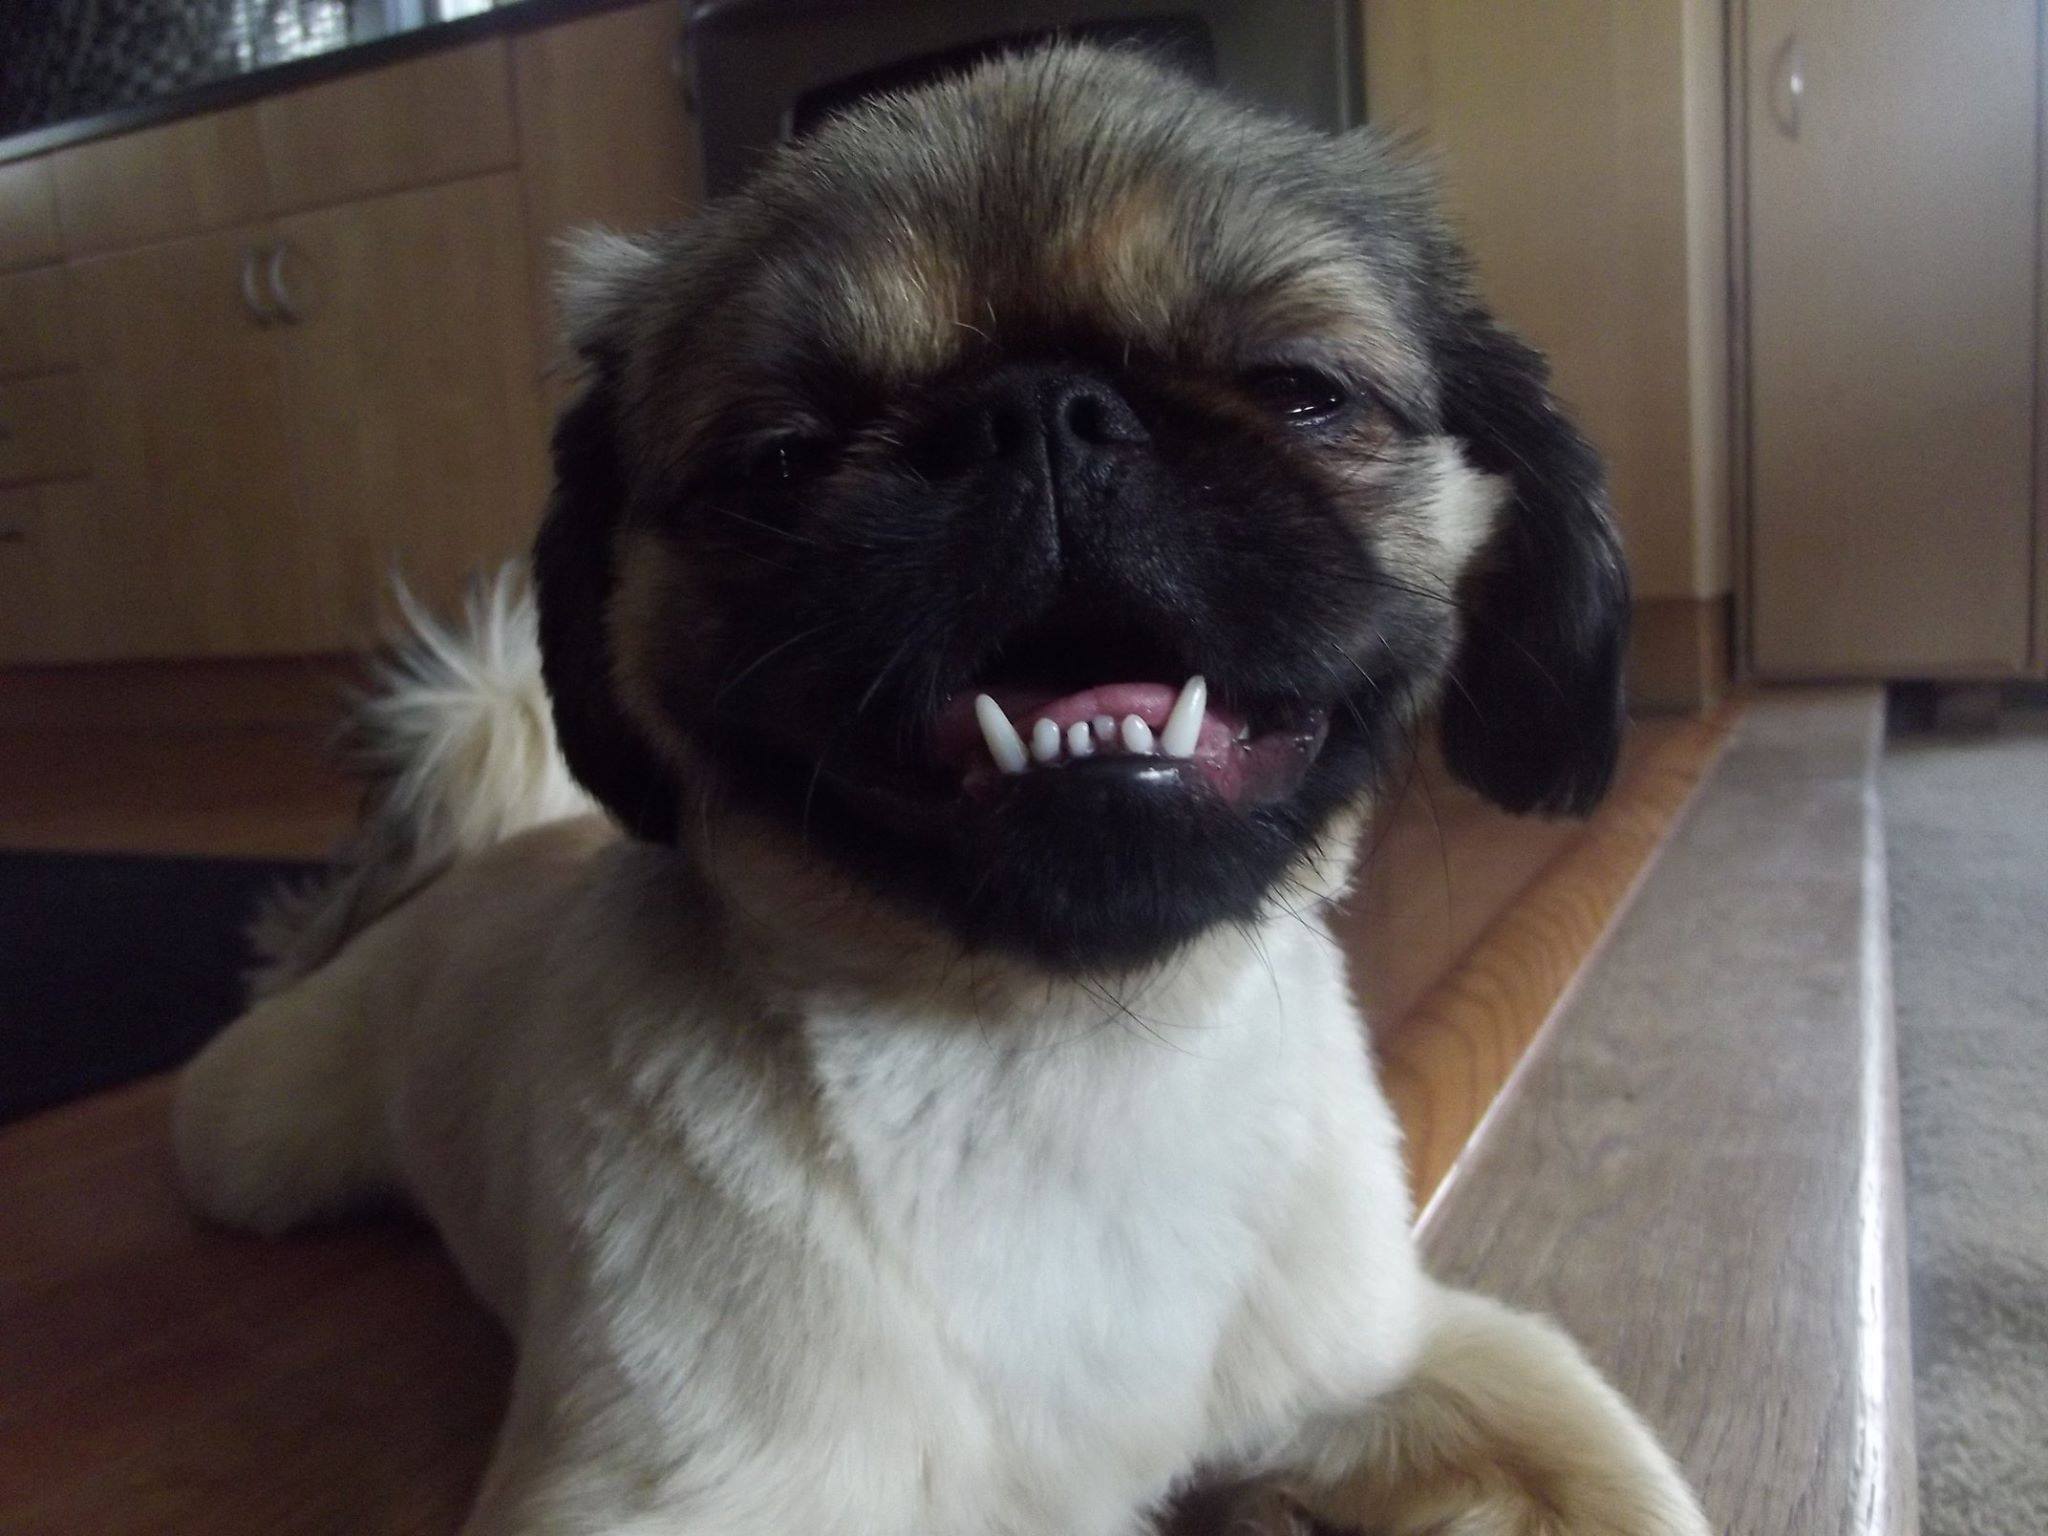 A Pekingese lying on the floor while smiling